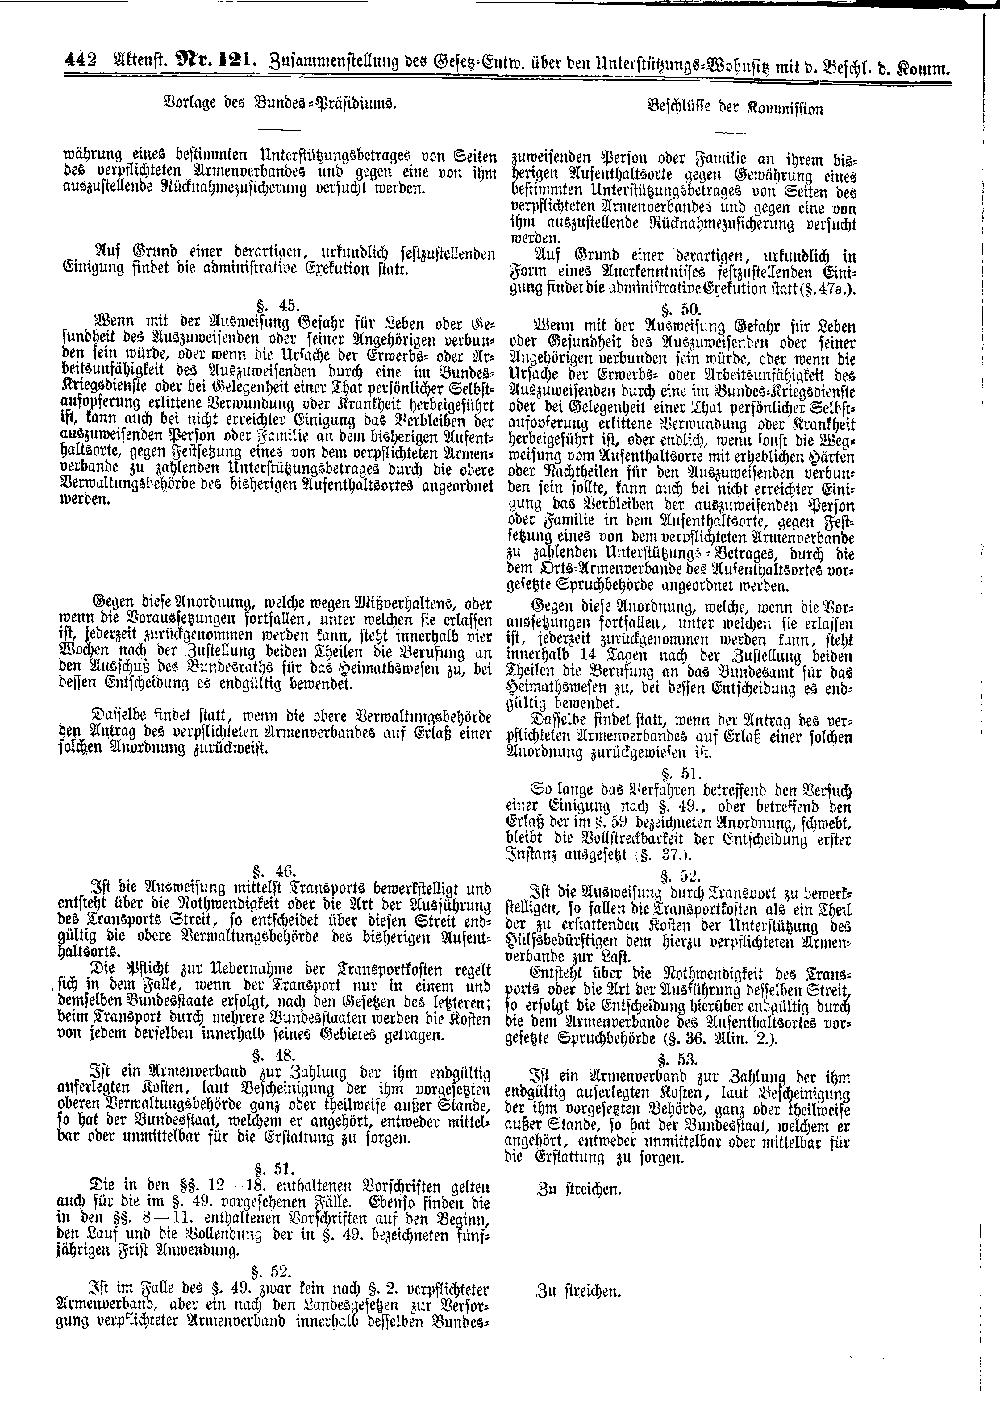 Scan of page 442